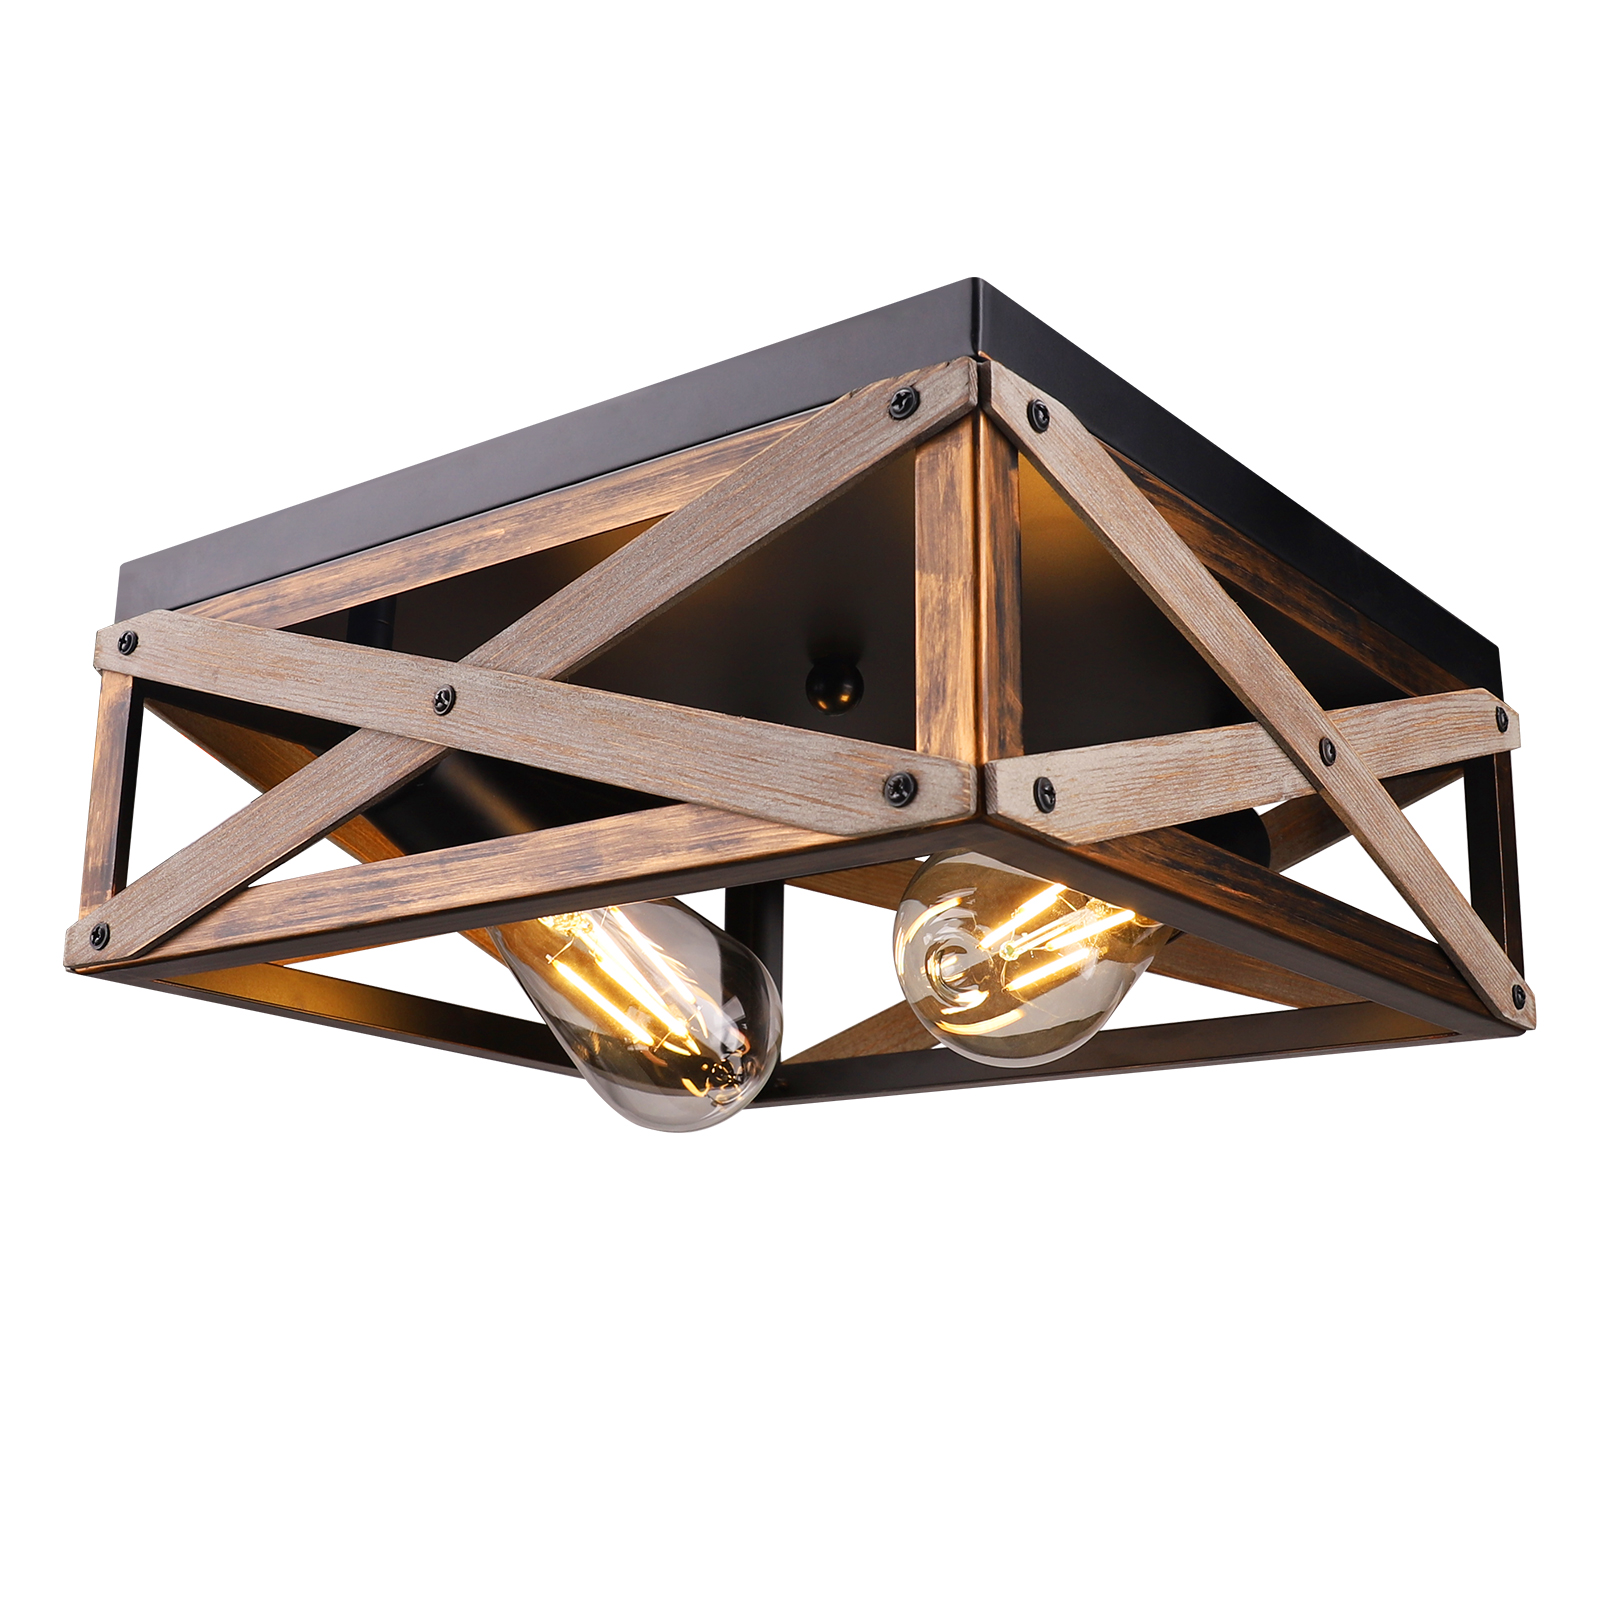 Rustic Flush Mount Ceiling Light Fixture, Farmhouse Light Fixtures Ceiling Two-Light Metal and Solid Wood Square Industrial Ceiling Lighting Fixtures for Farmhouse Hallway Bedroom Kitchen Entryway